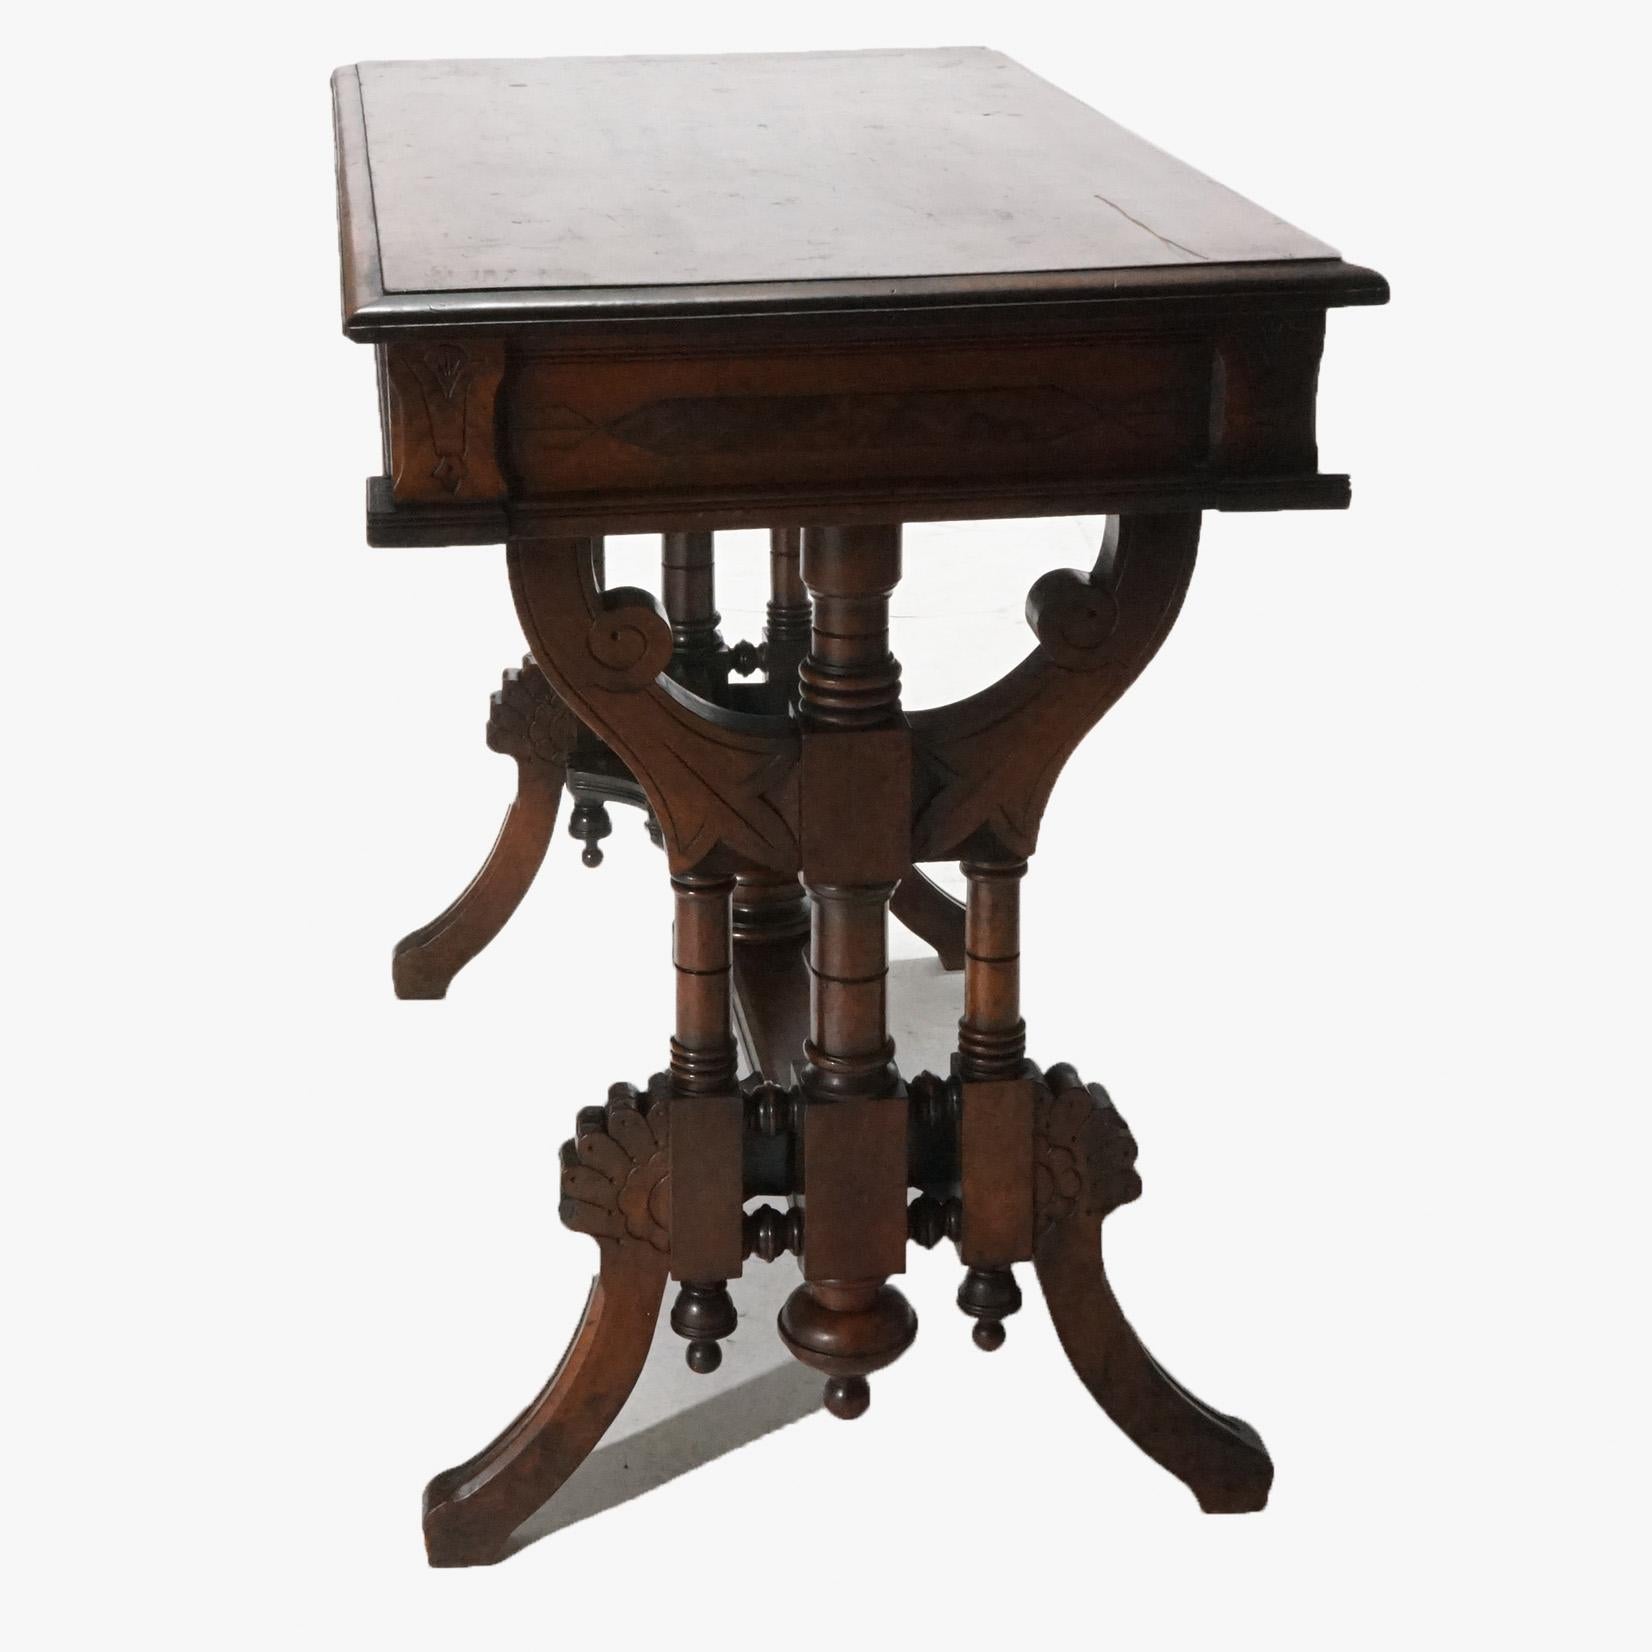 An antique Renaissance Revival library table offers walnut construction with beveled top having carved and incised skirt raised on ornate trestle legs having turned columns and decorated stretcher with central finial, c1890.

Measures- 30''H x 36''W